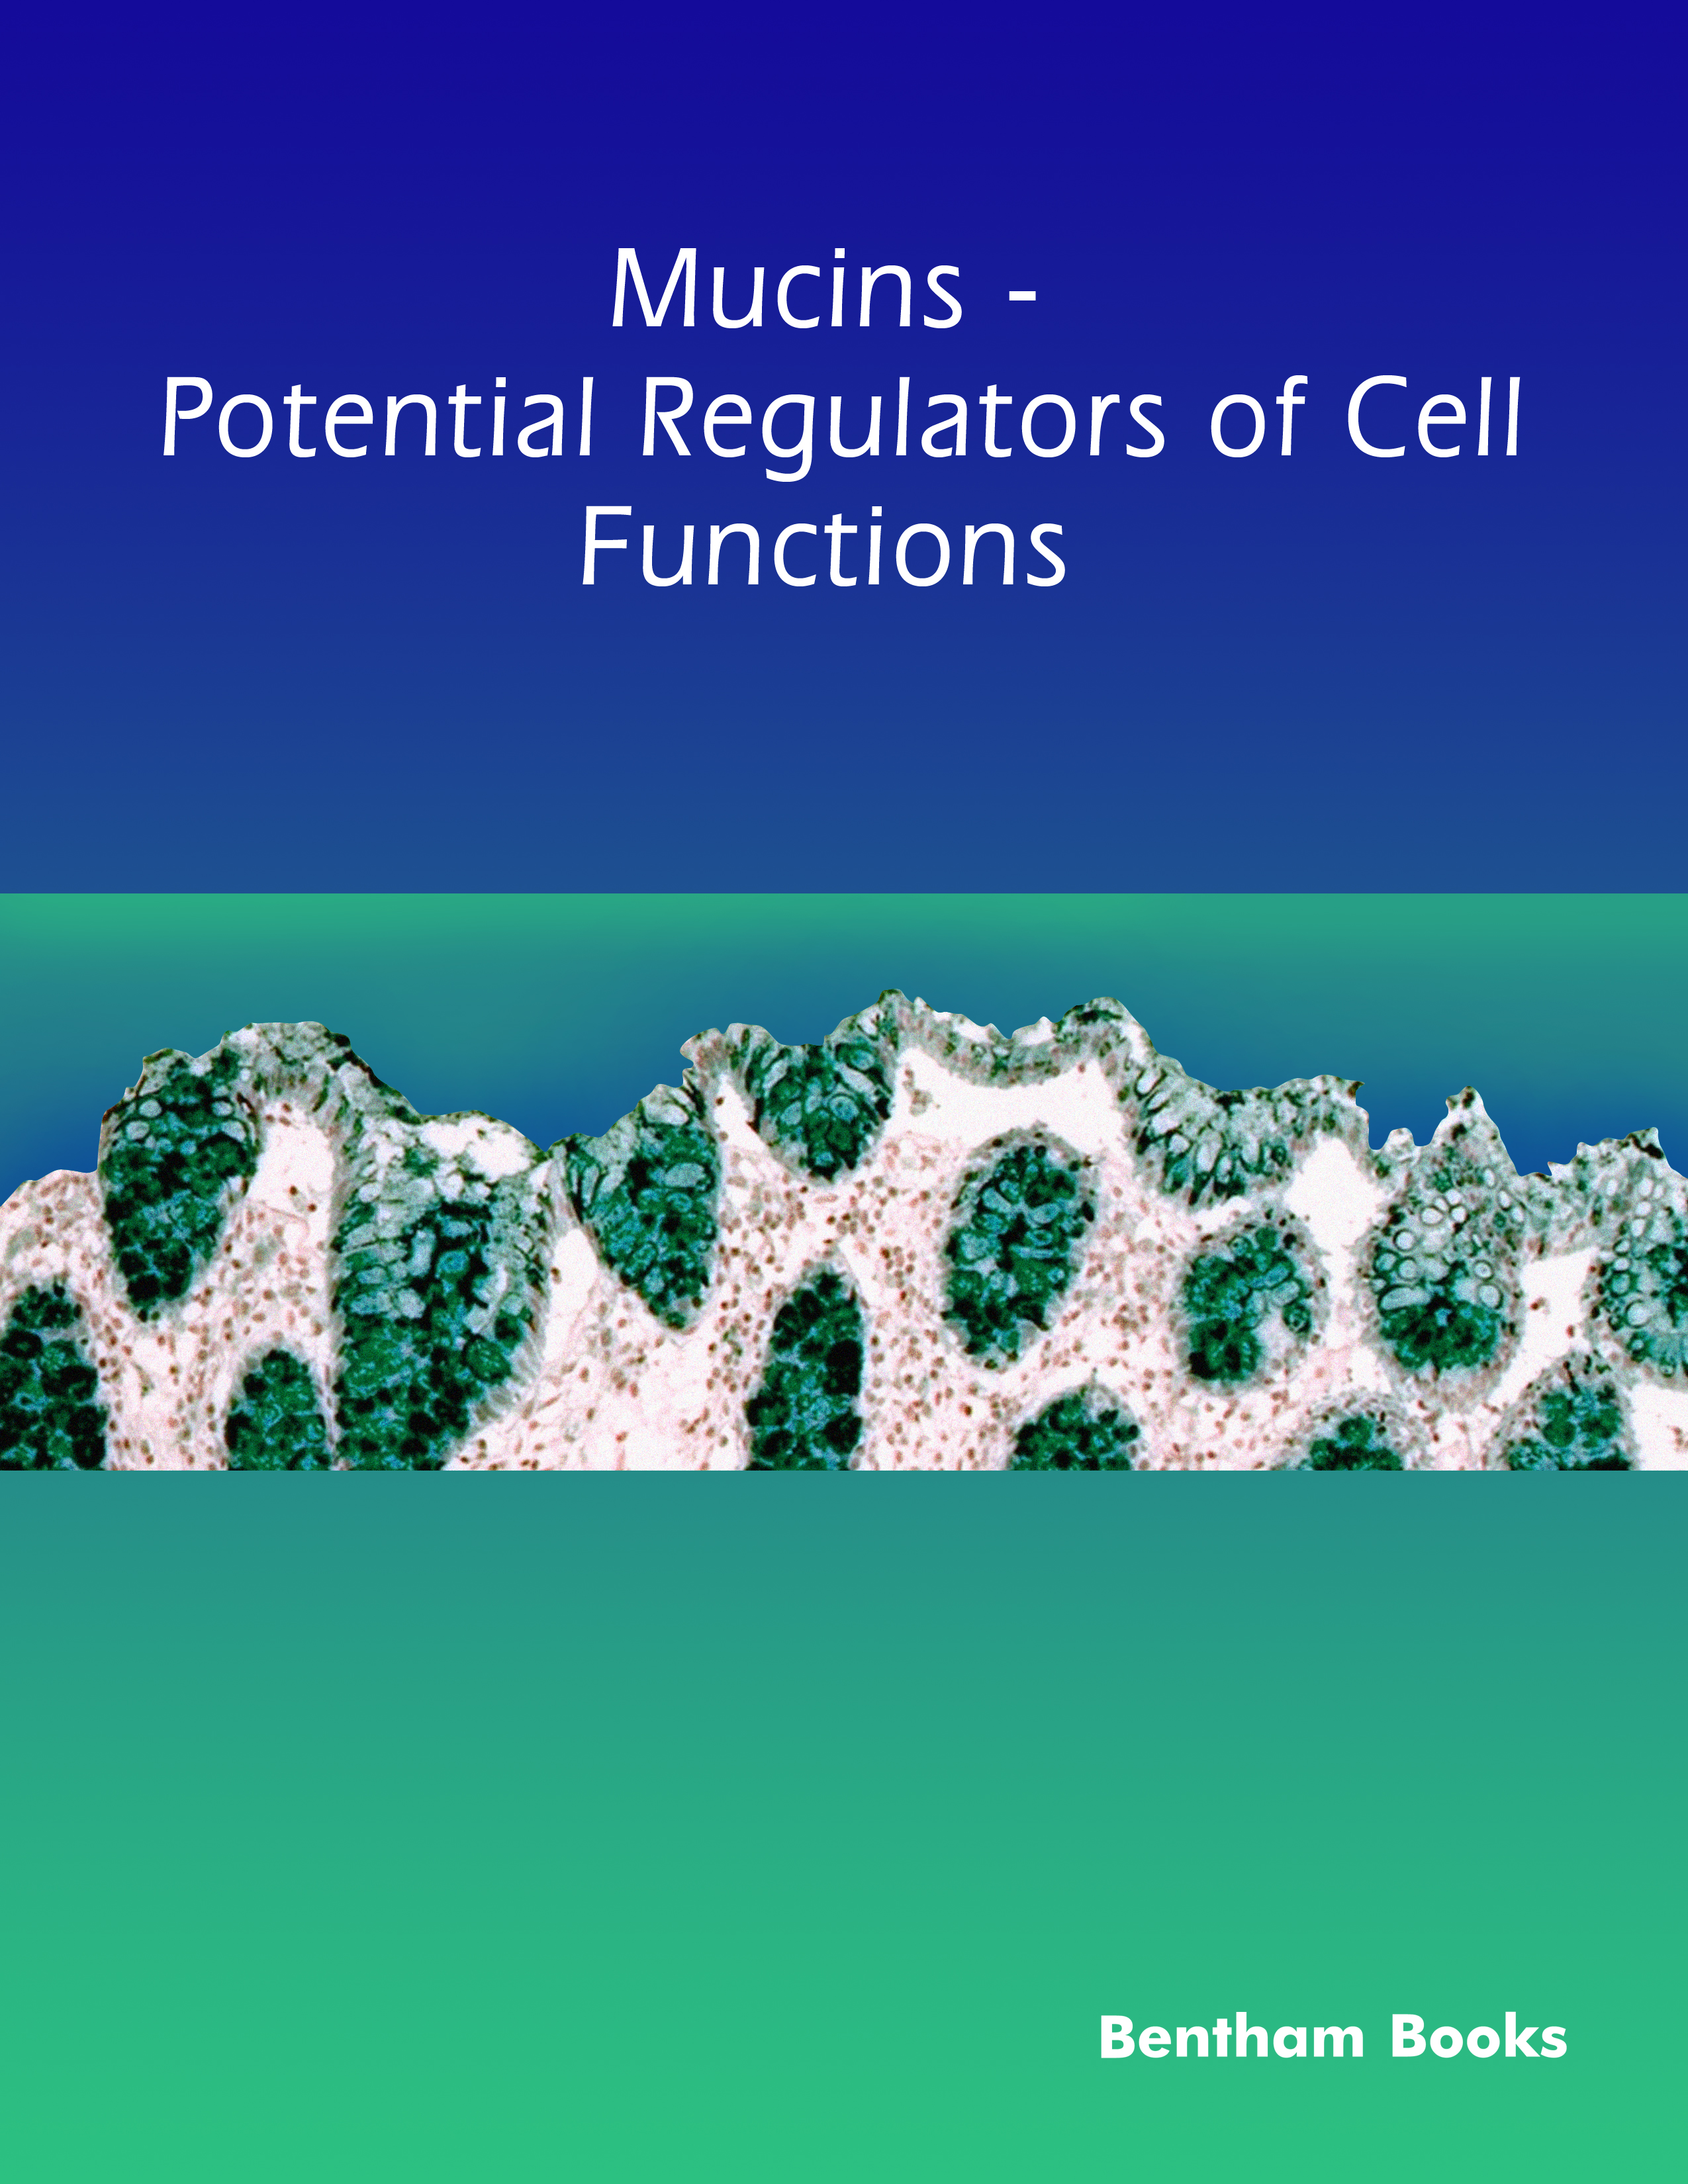 Mucins – Potential Regulators of Cell Functions